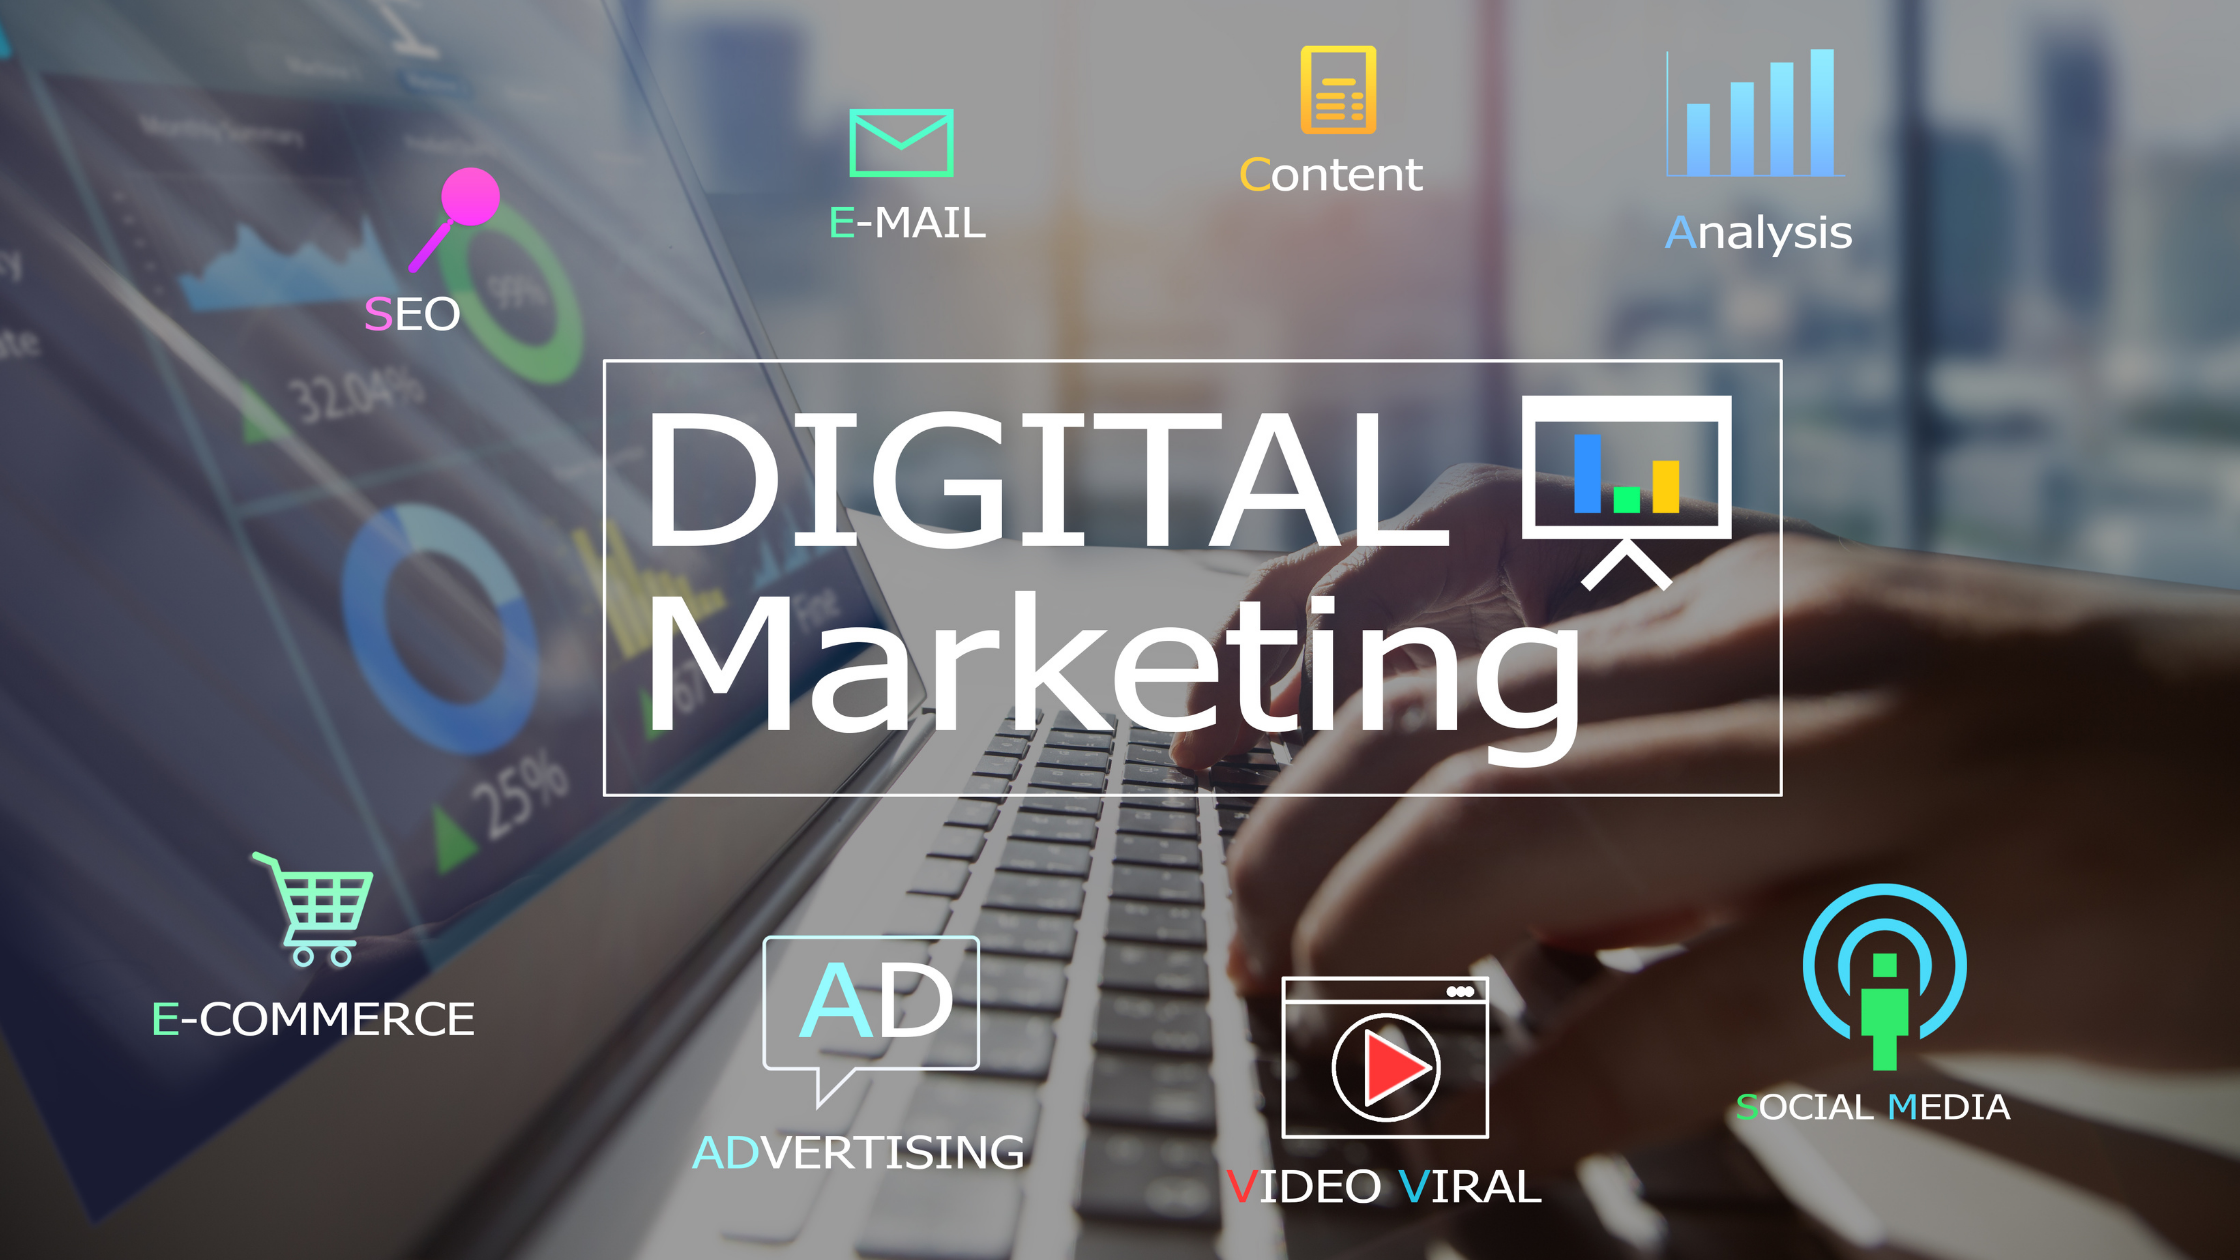 Digital Marketing. SEO. Email. Content. Analysis. Ecommerce. Advertising. Video Viral. Social Media.